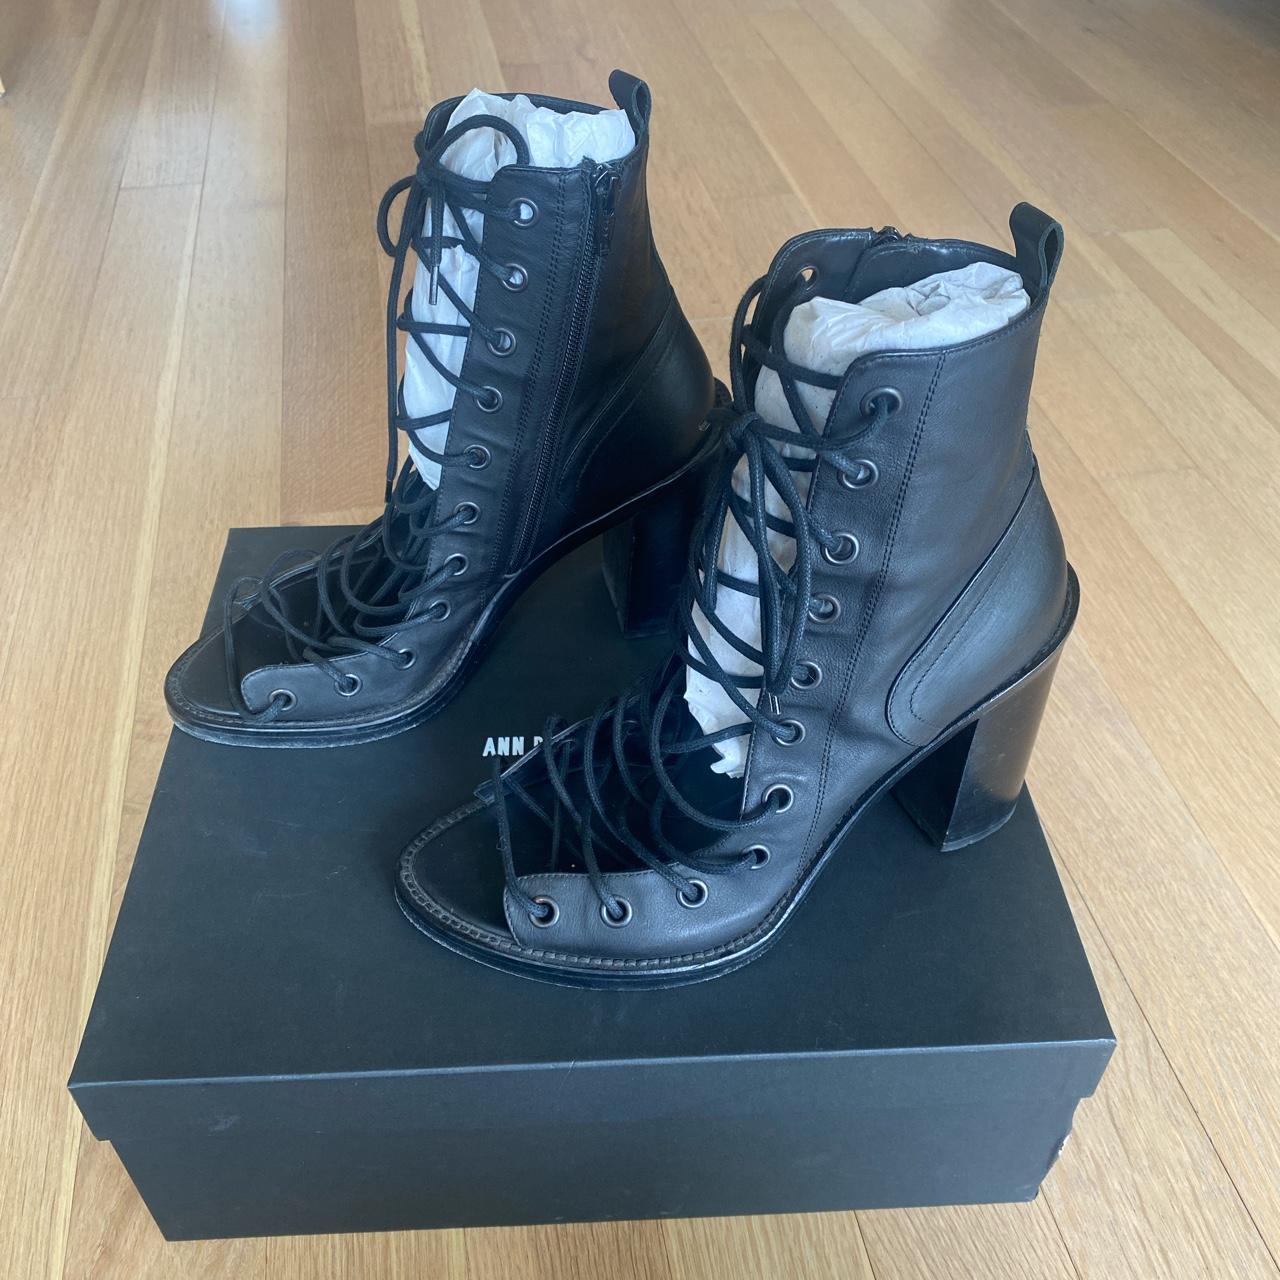 Product Image 2 - Iconic Ann Demeulemeester lace ups.